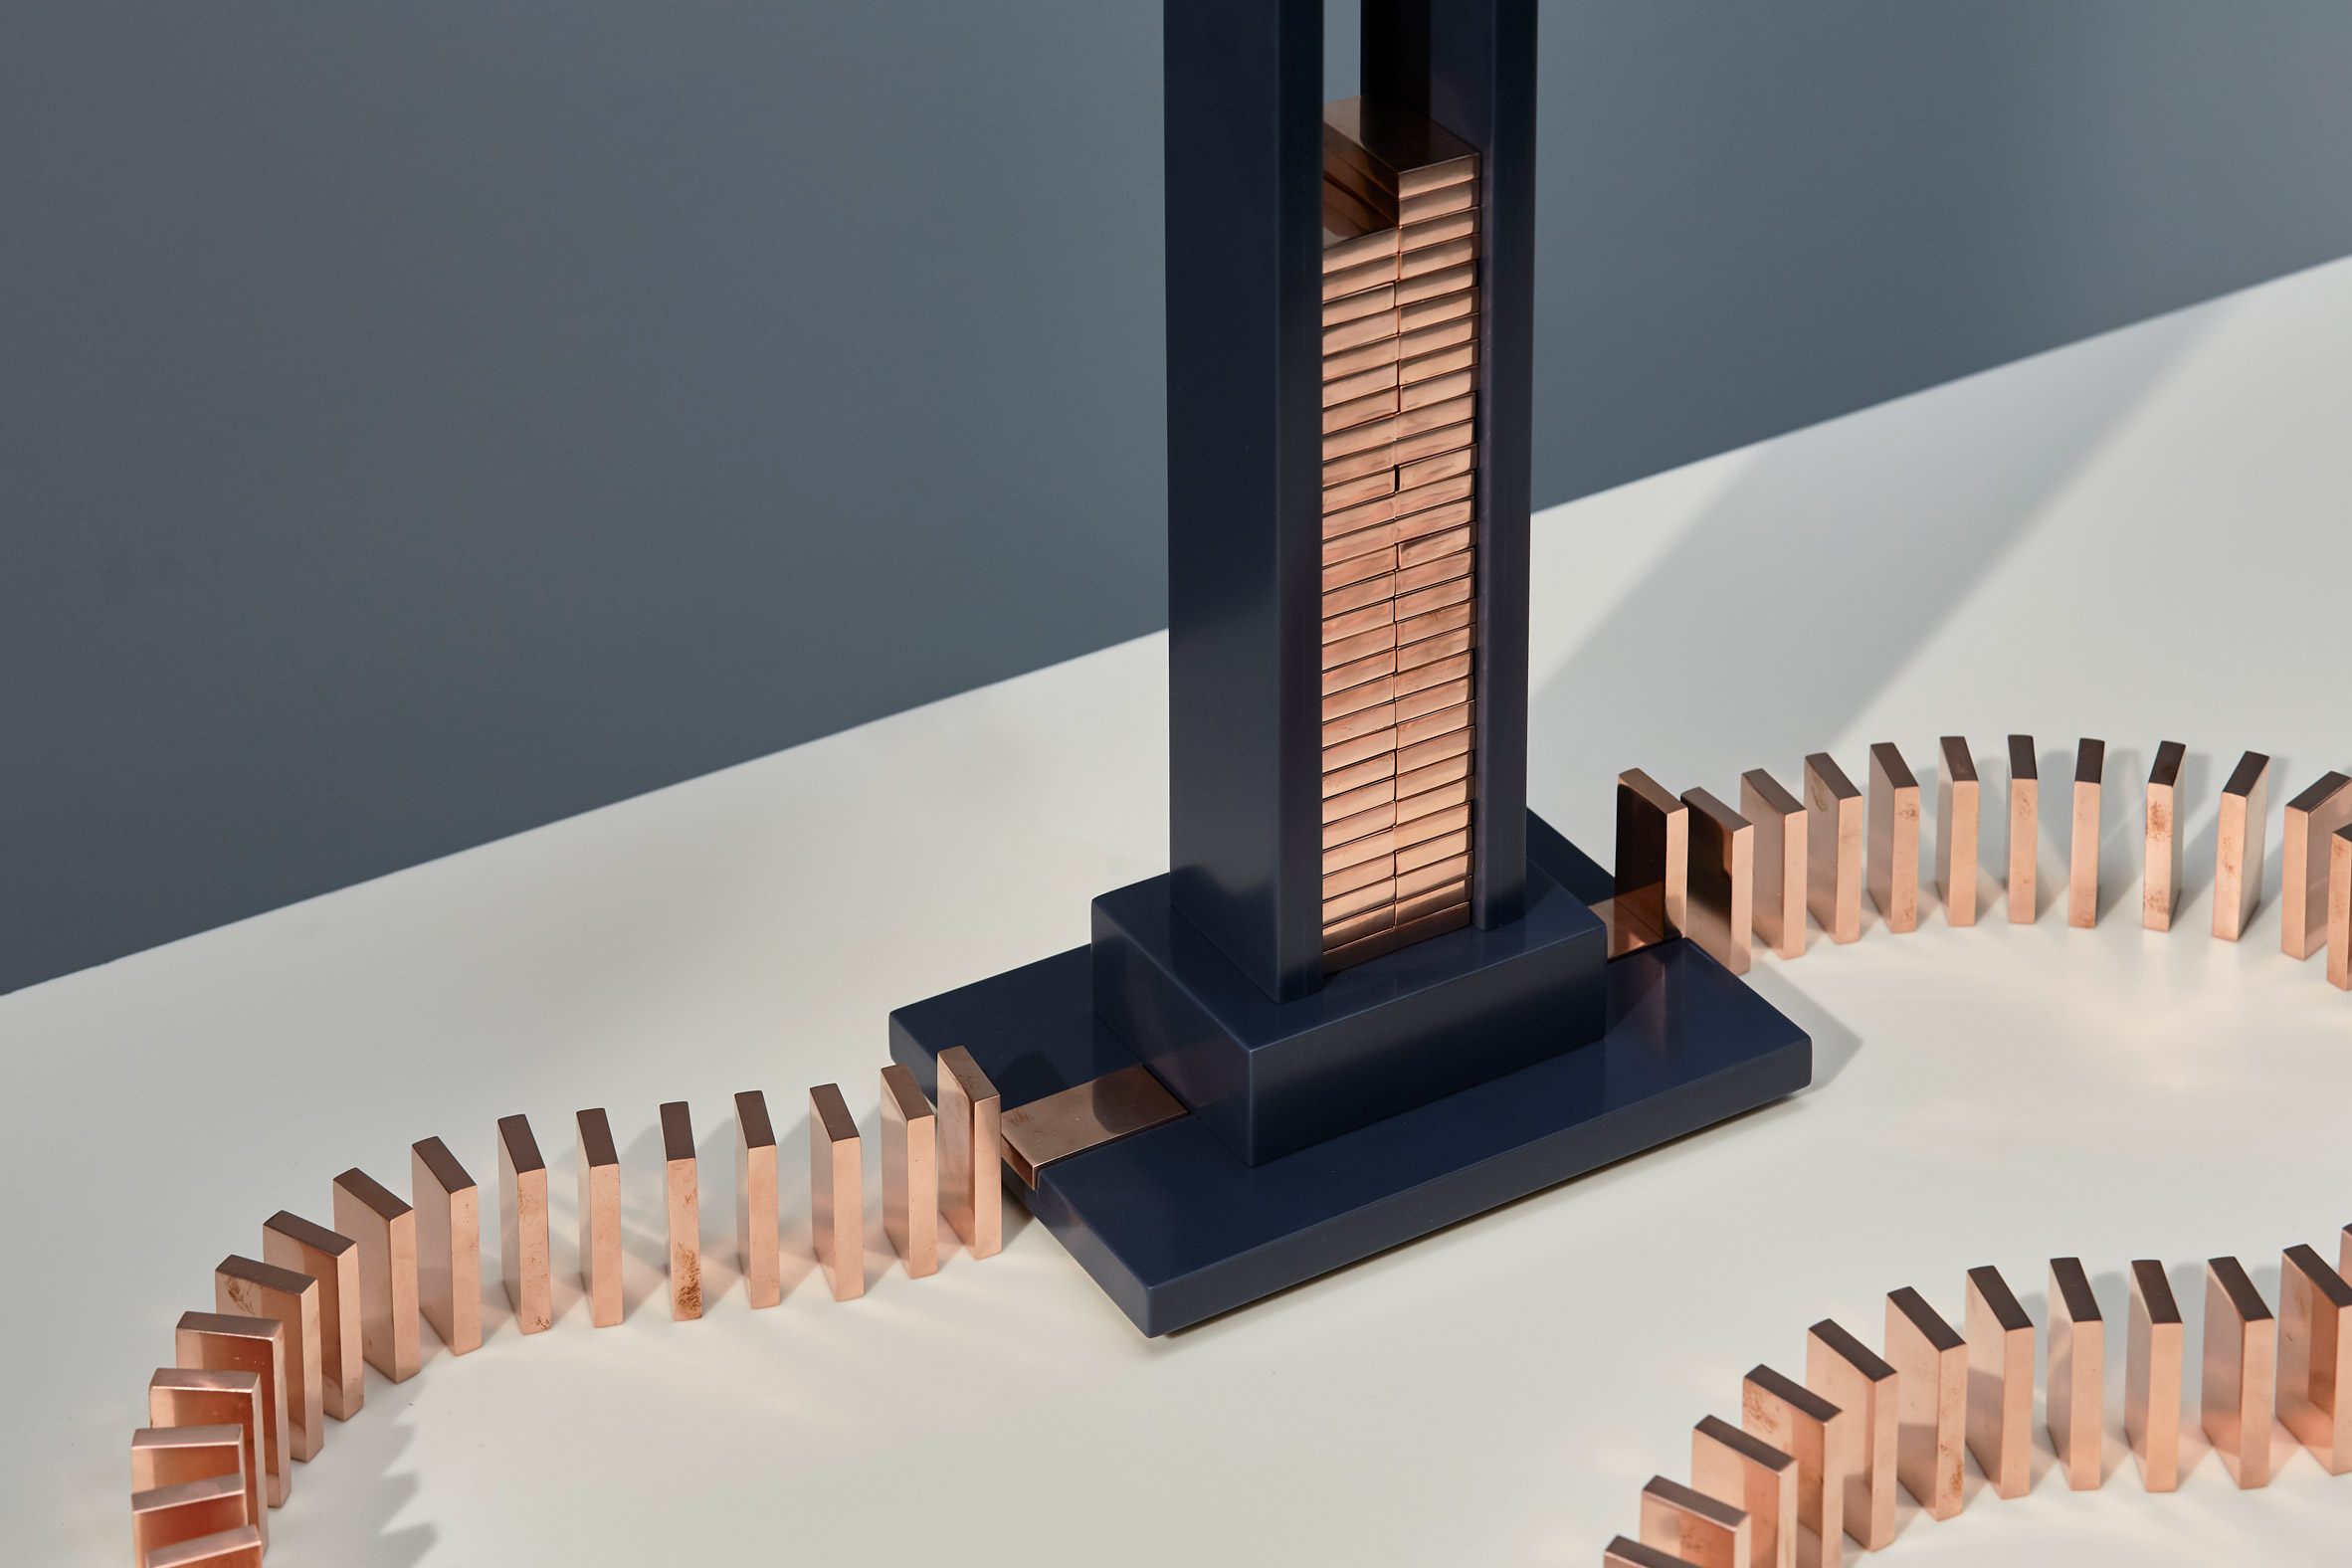 Glithero creates lamp you switch on by toppling a row of dominoes